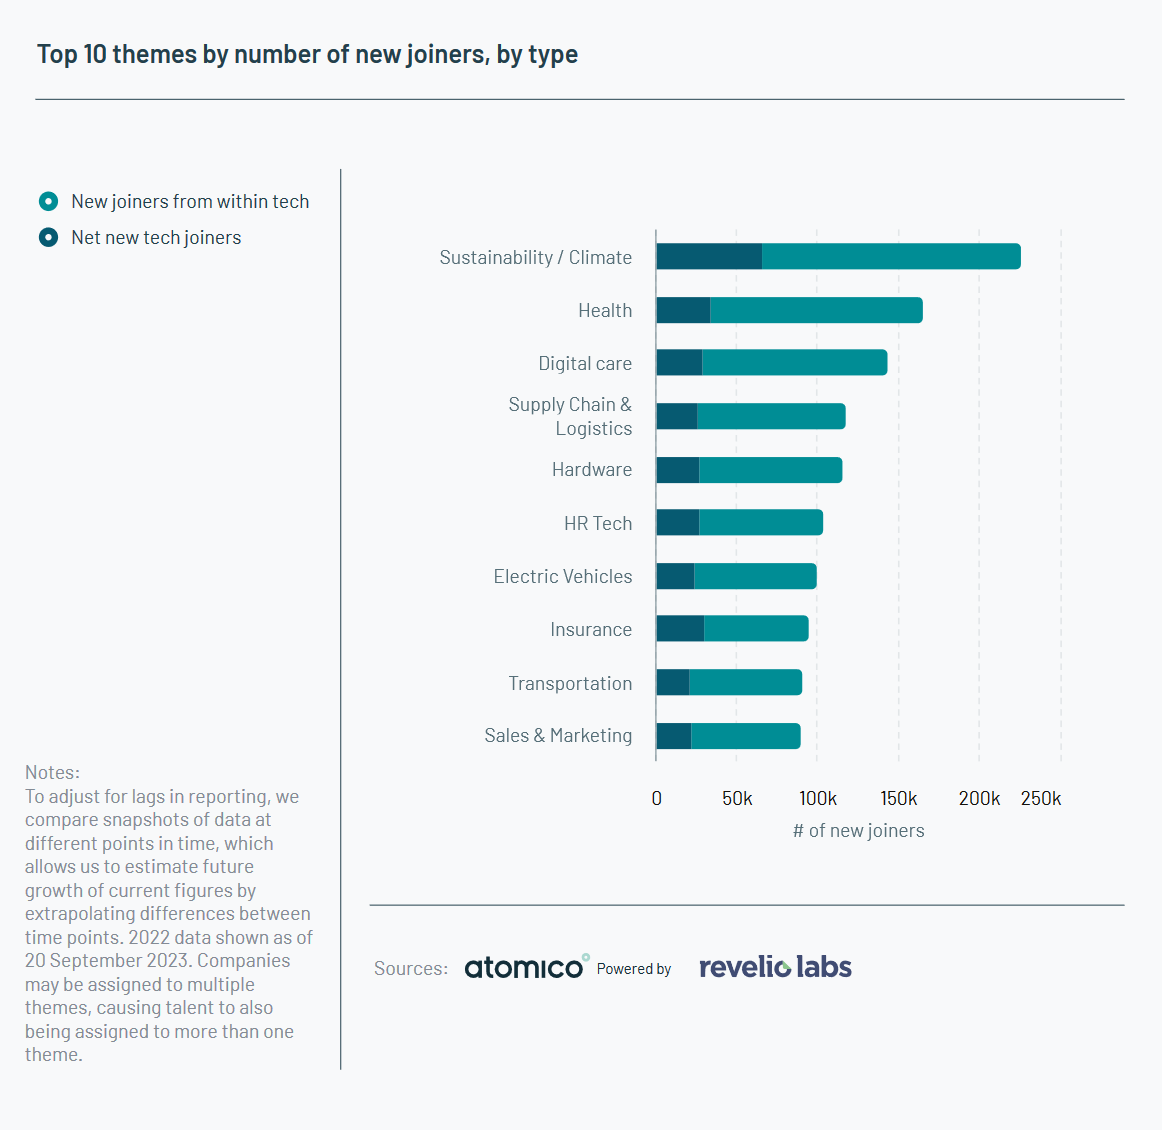 Top 10 themes by number of new joiners, by type